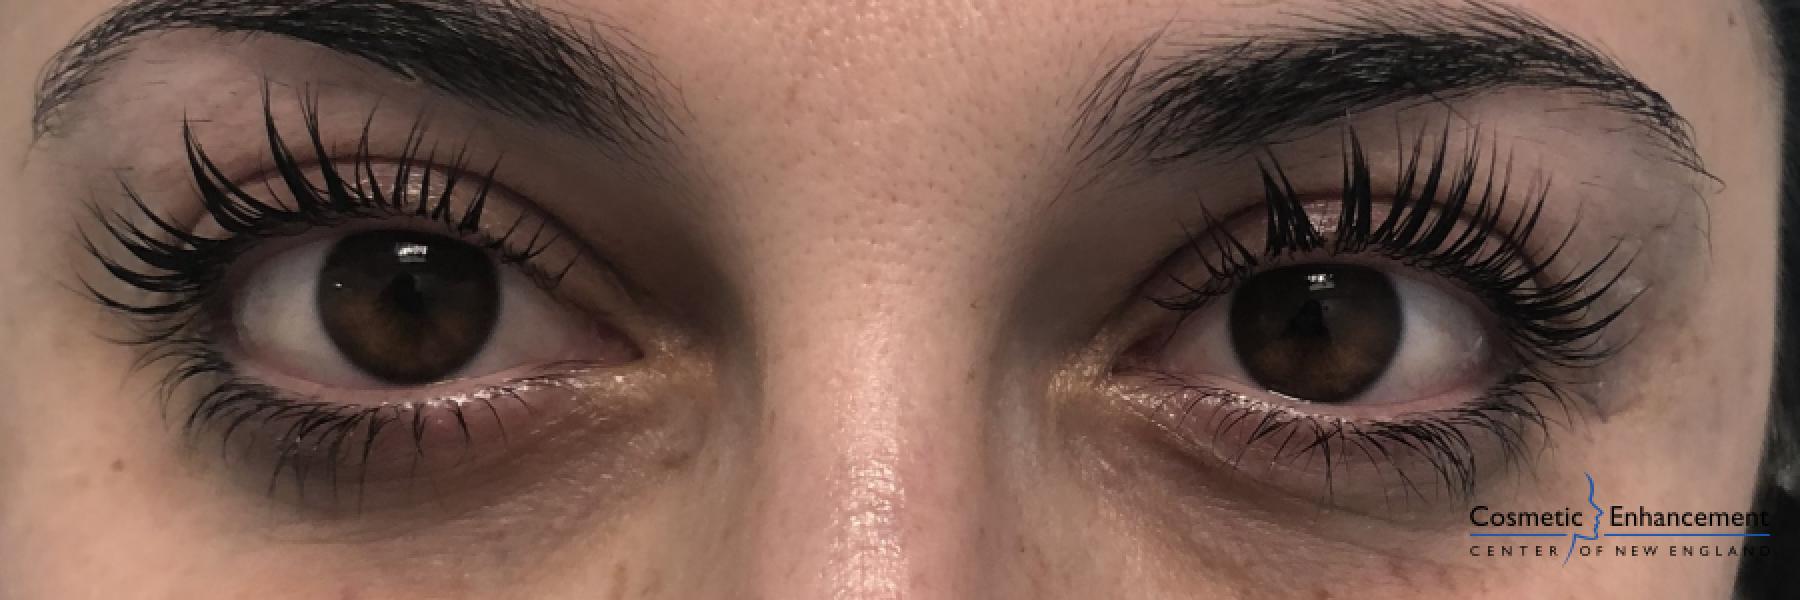 Lash Lift And Tint: Patient 1 - After 1